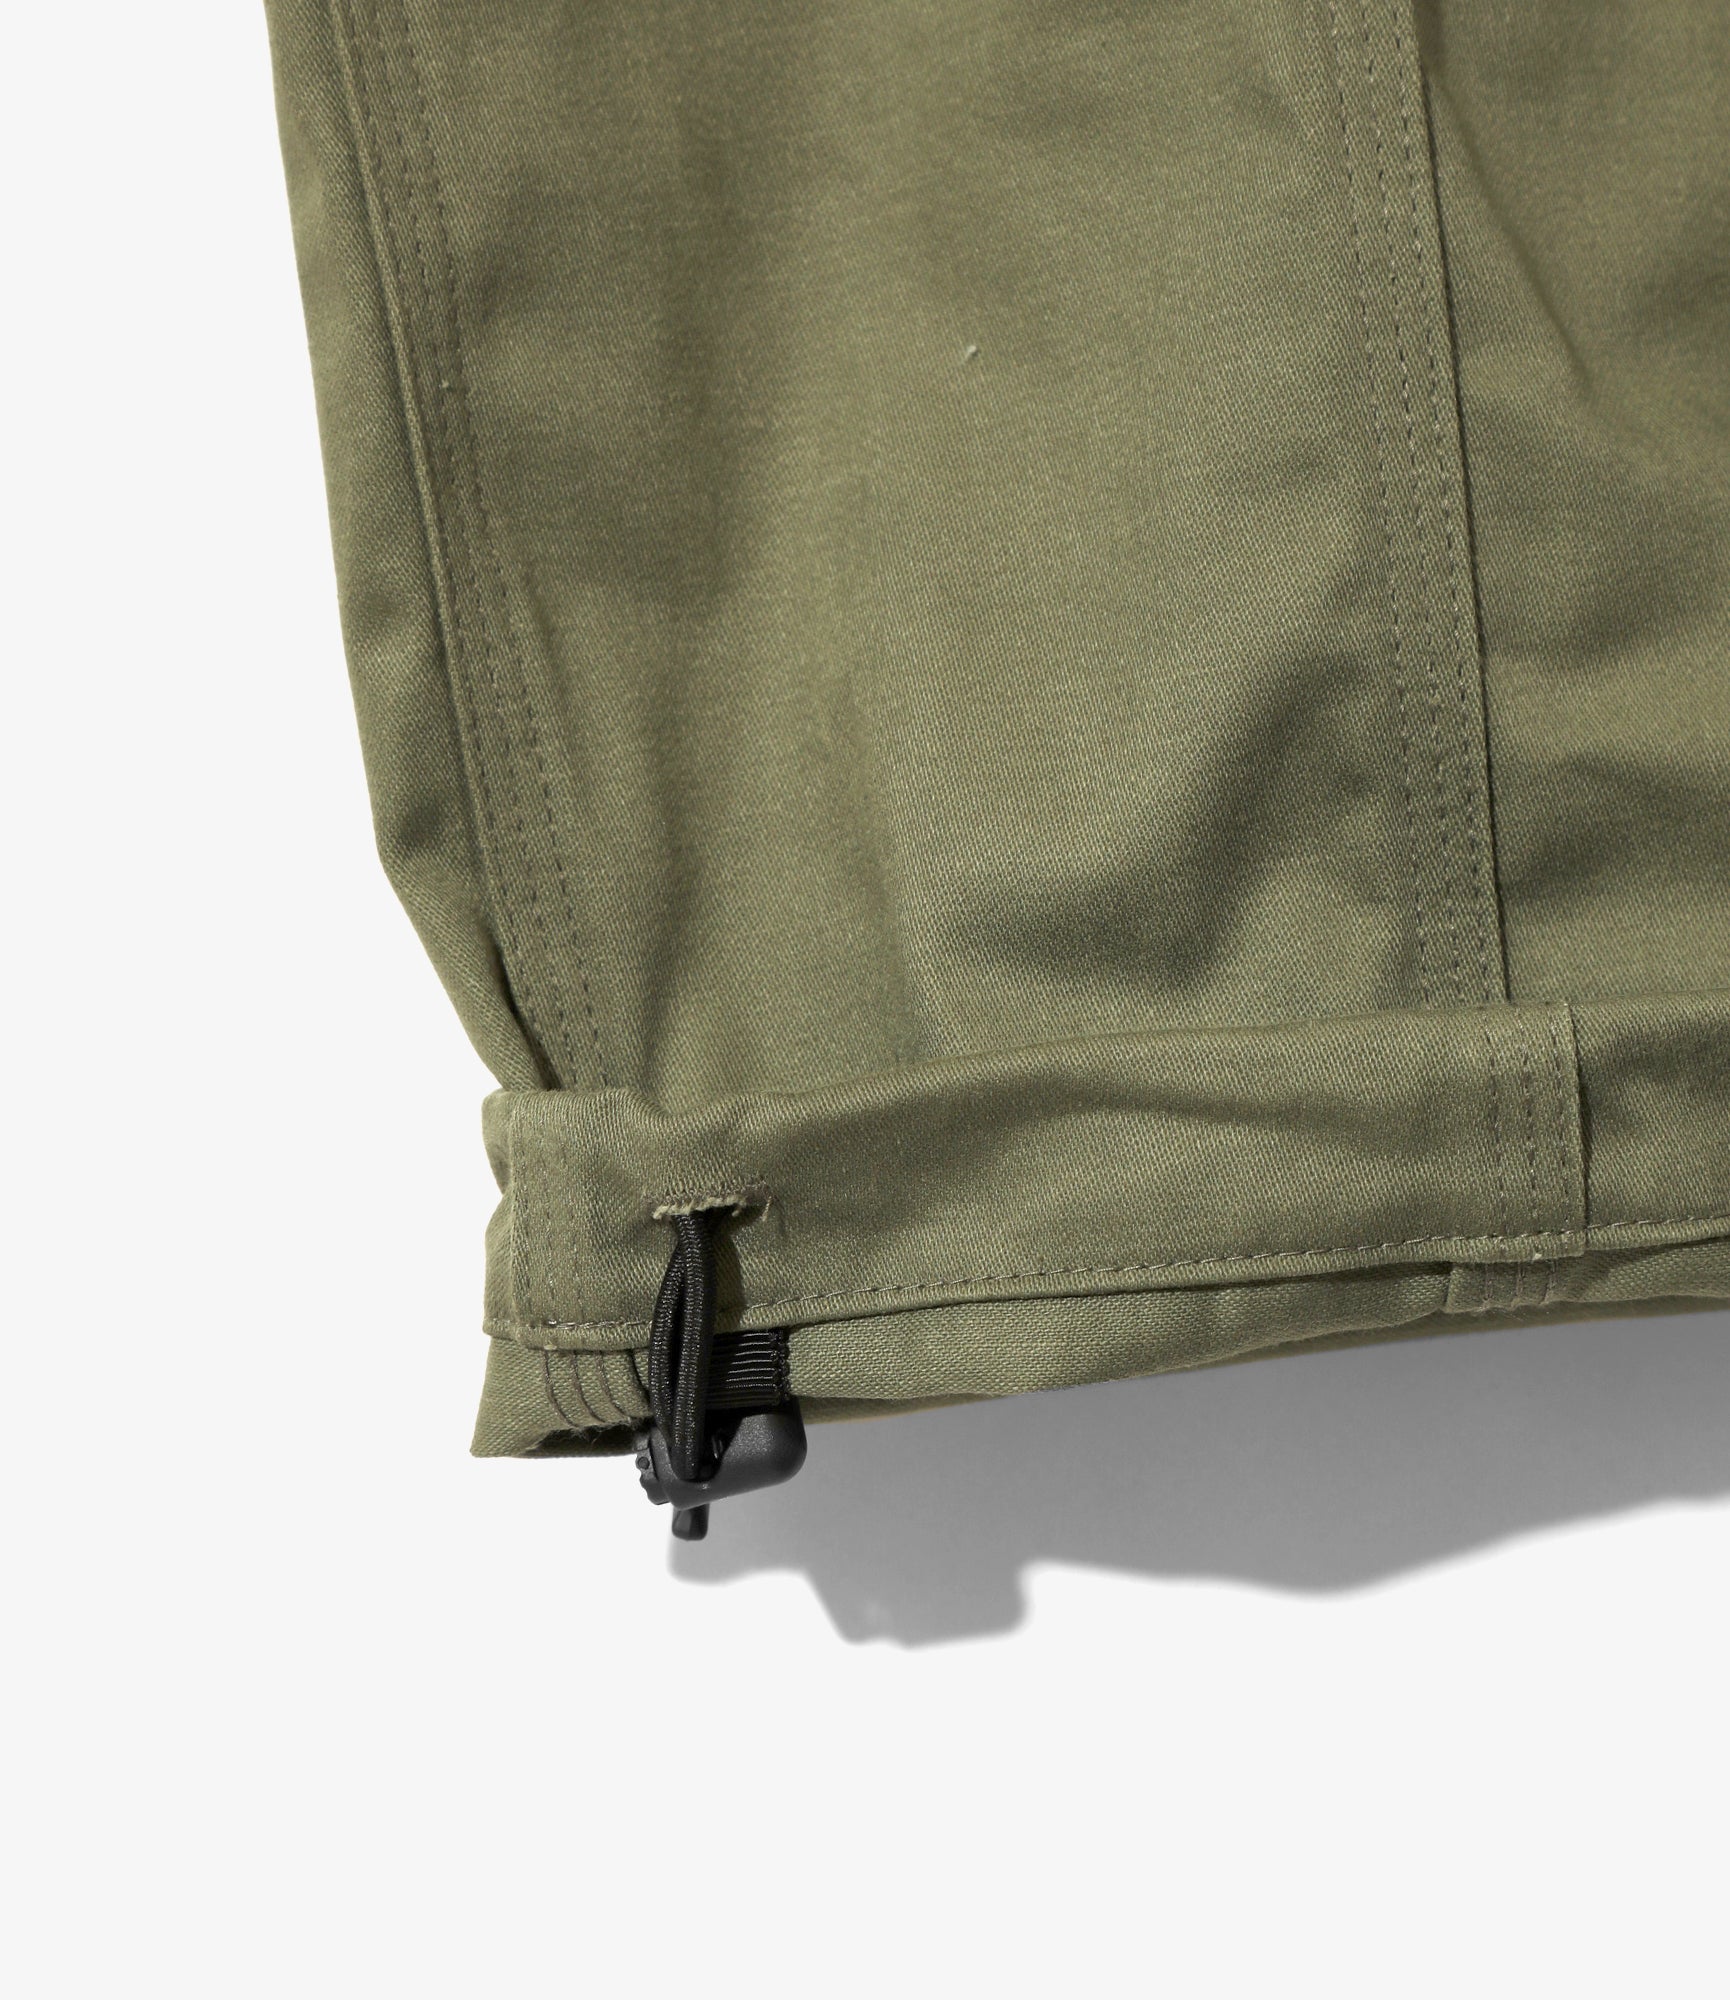 Belted C.S. Pant - Olive - Cotton Back Sateen